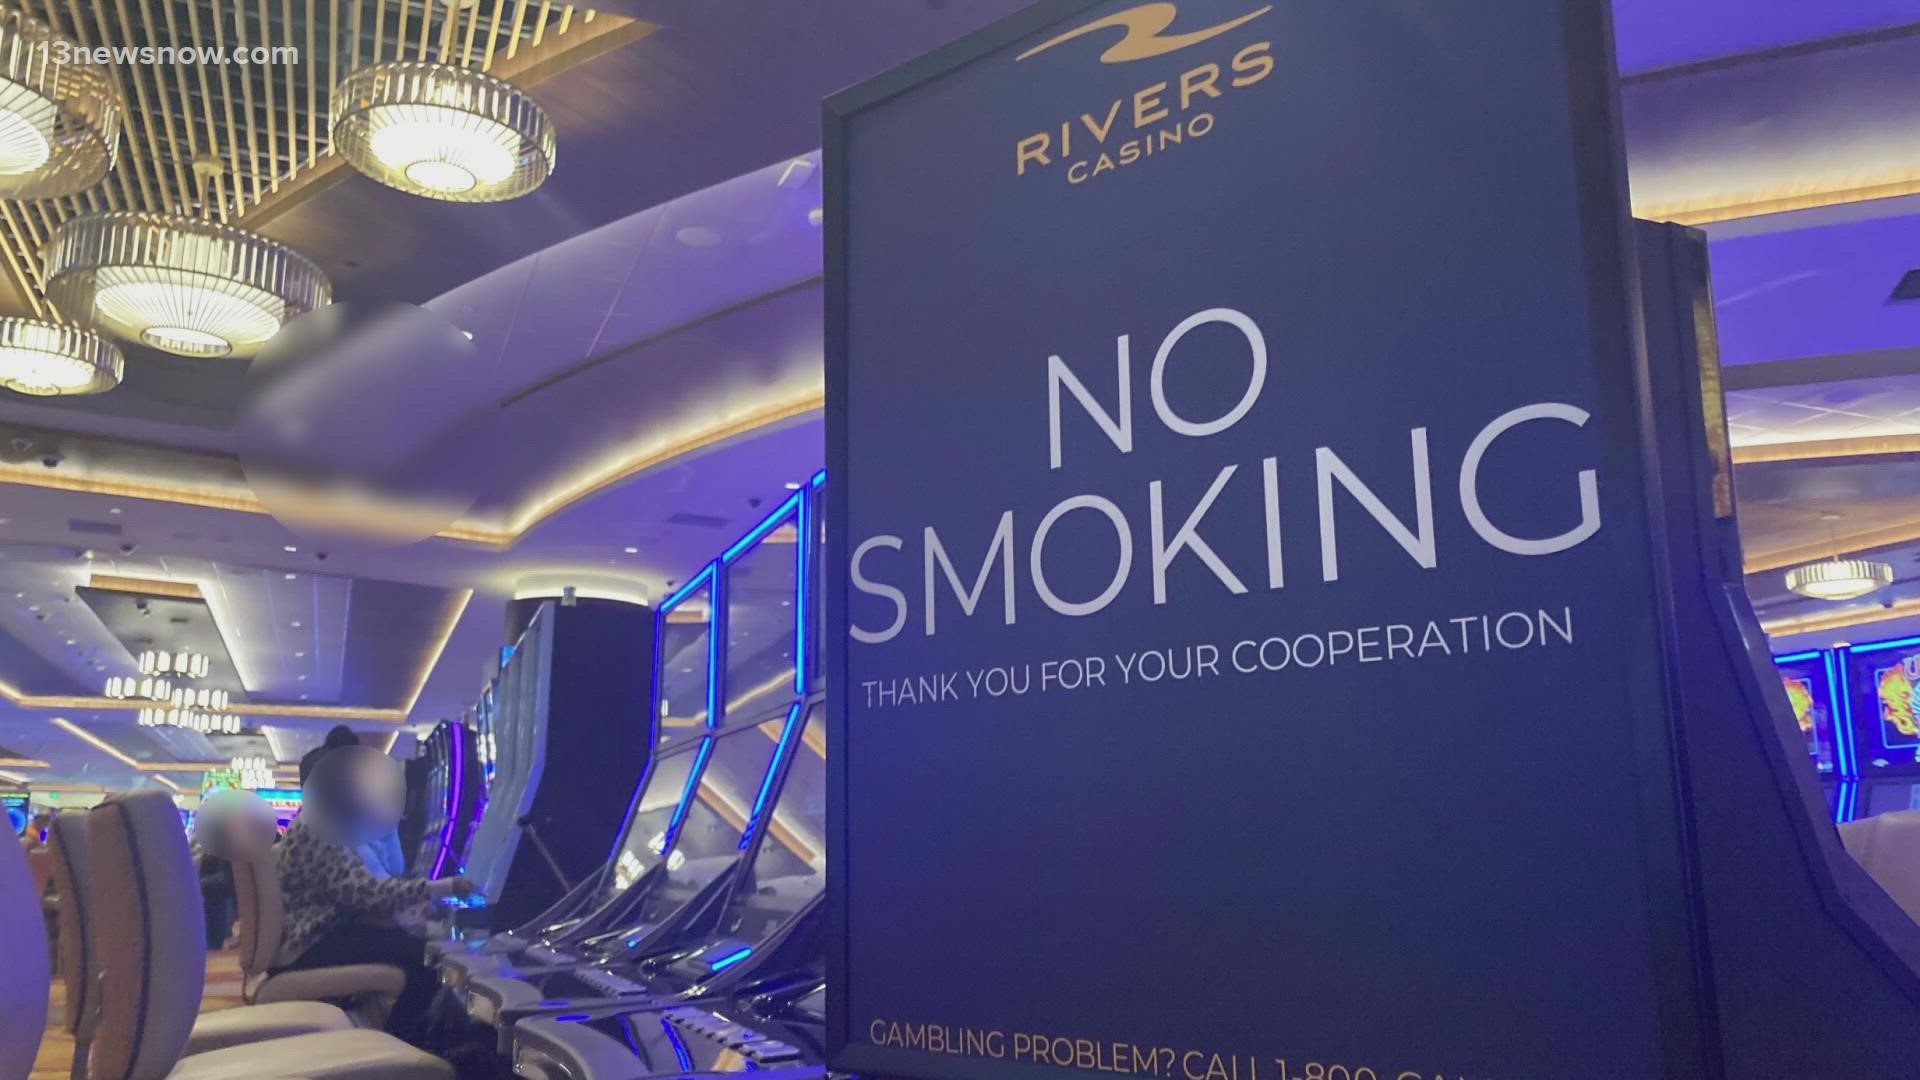 A spokesperson for the casino said earlier this week the building has designated non-smoking areas throughout, like the restaurant, sportsbook and poker room